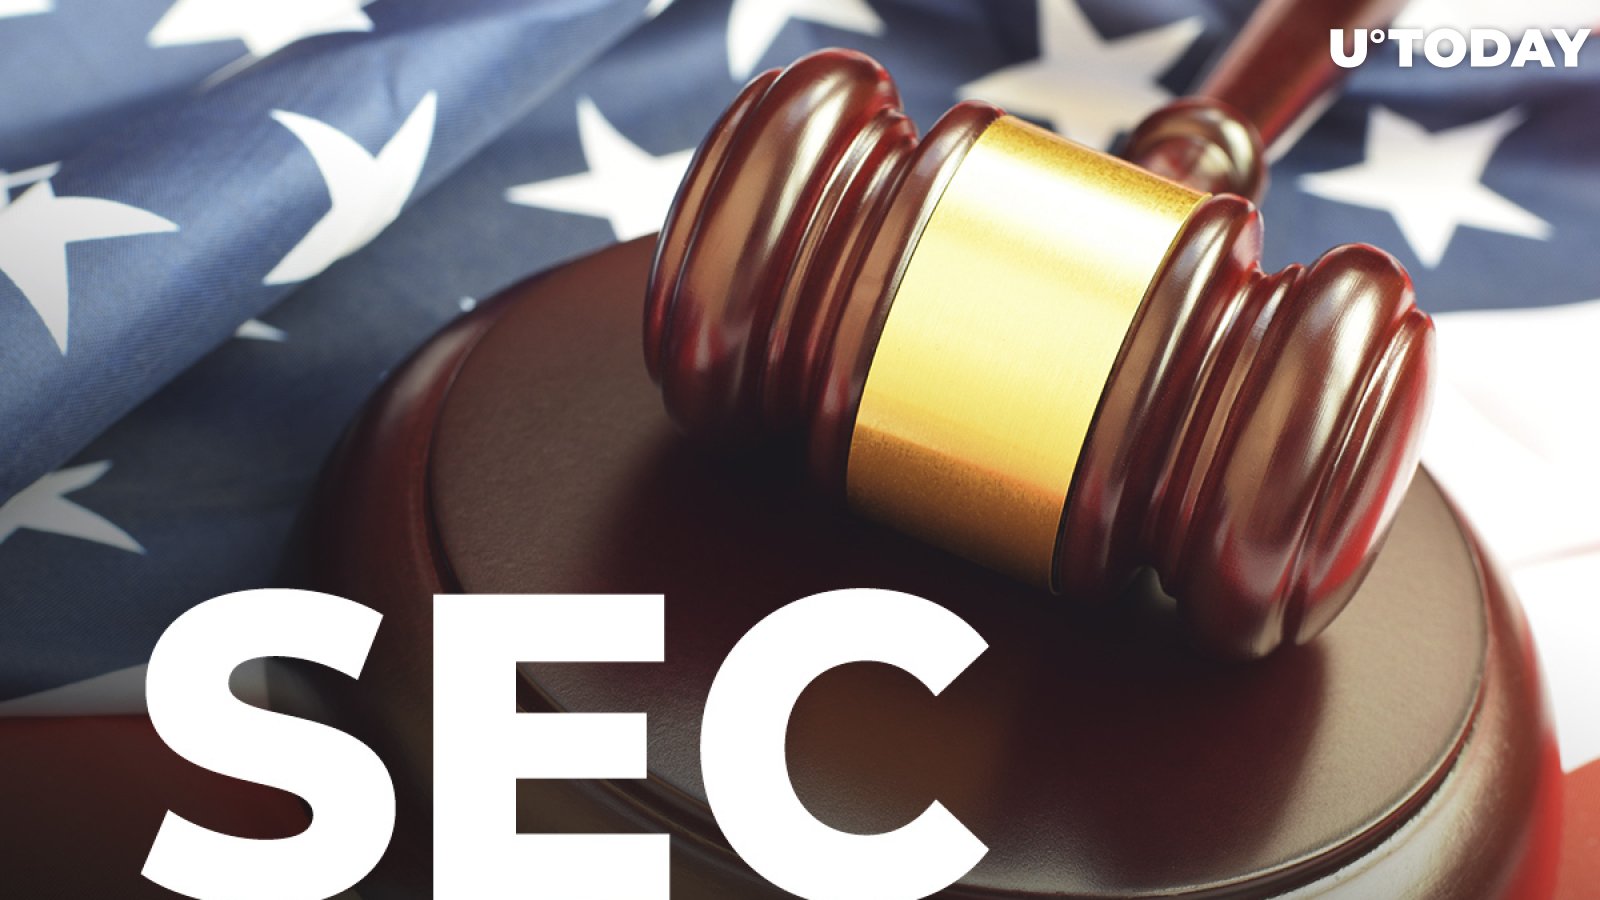 Ripple Is Not the Only Crypto Giant Sued by SEC, Here Are Some More